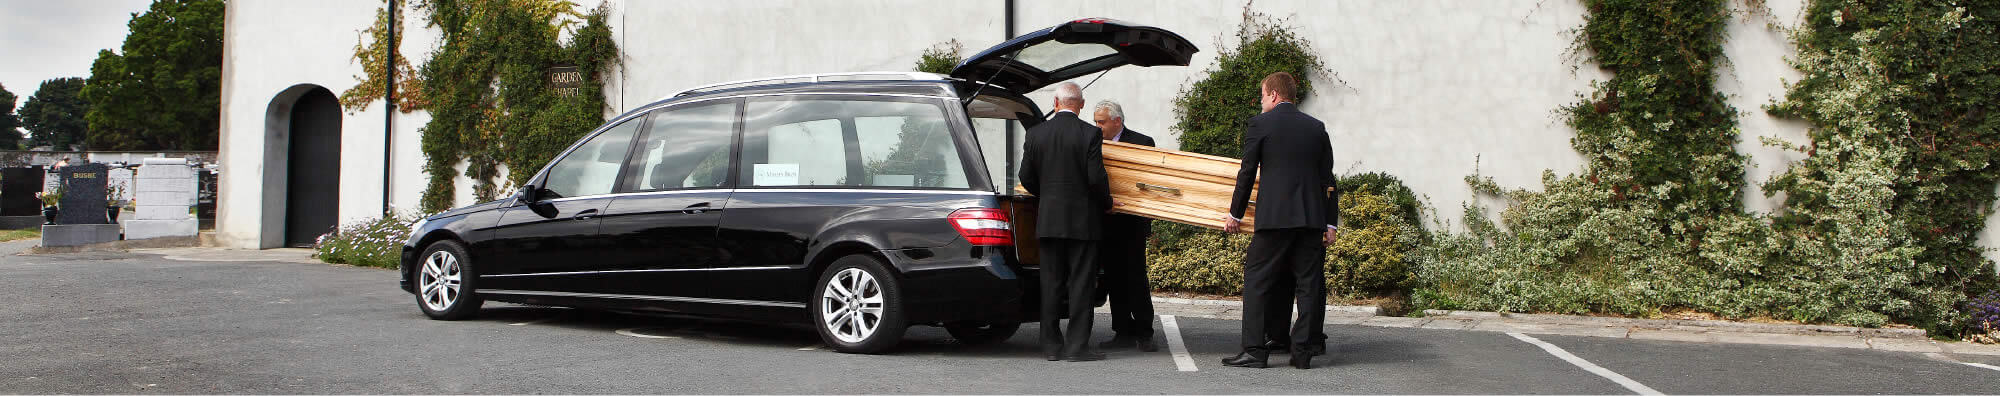 Massey Brothers Funeral Homes Dublin